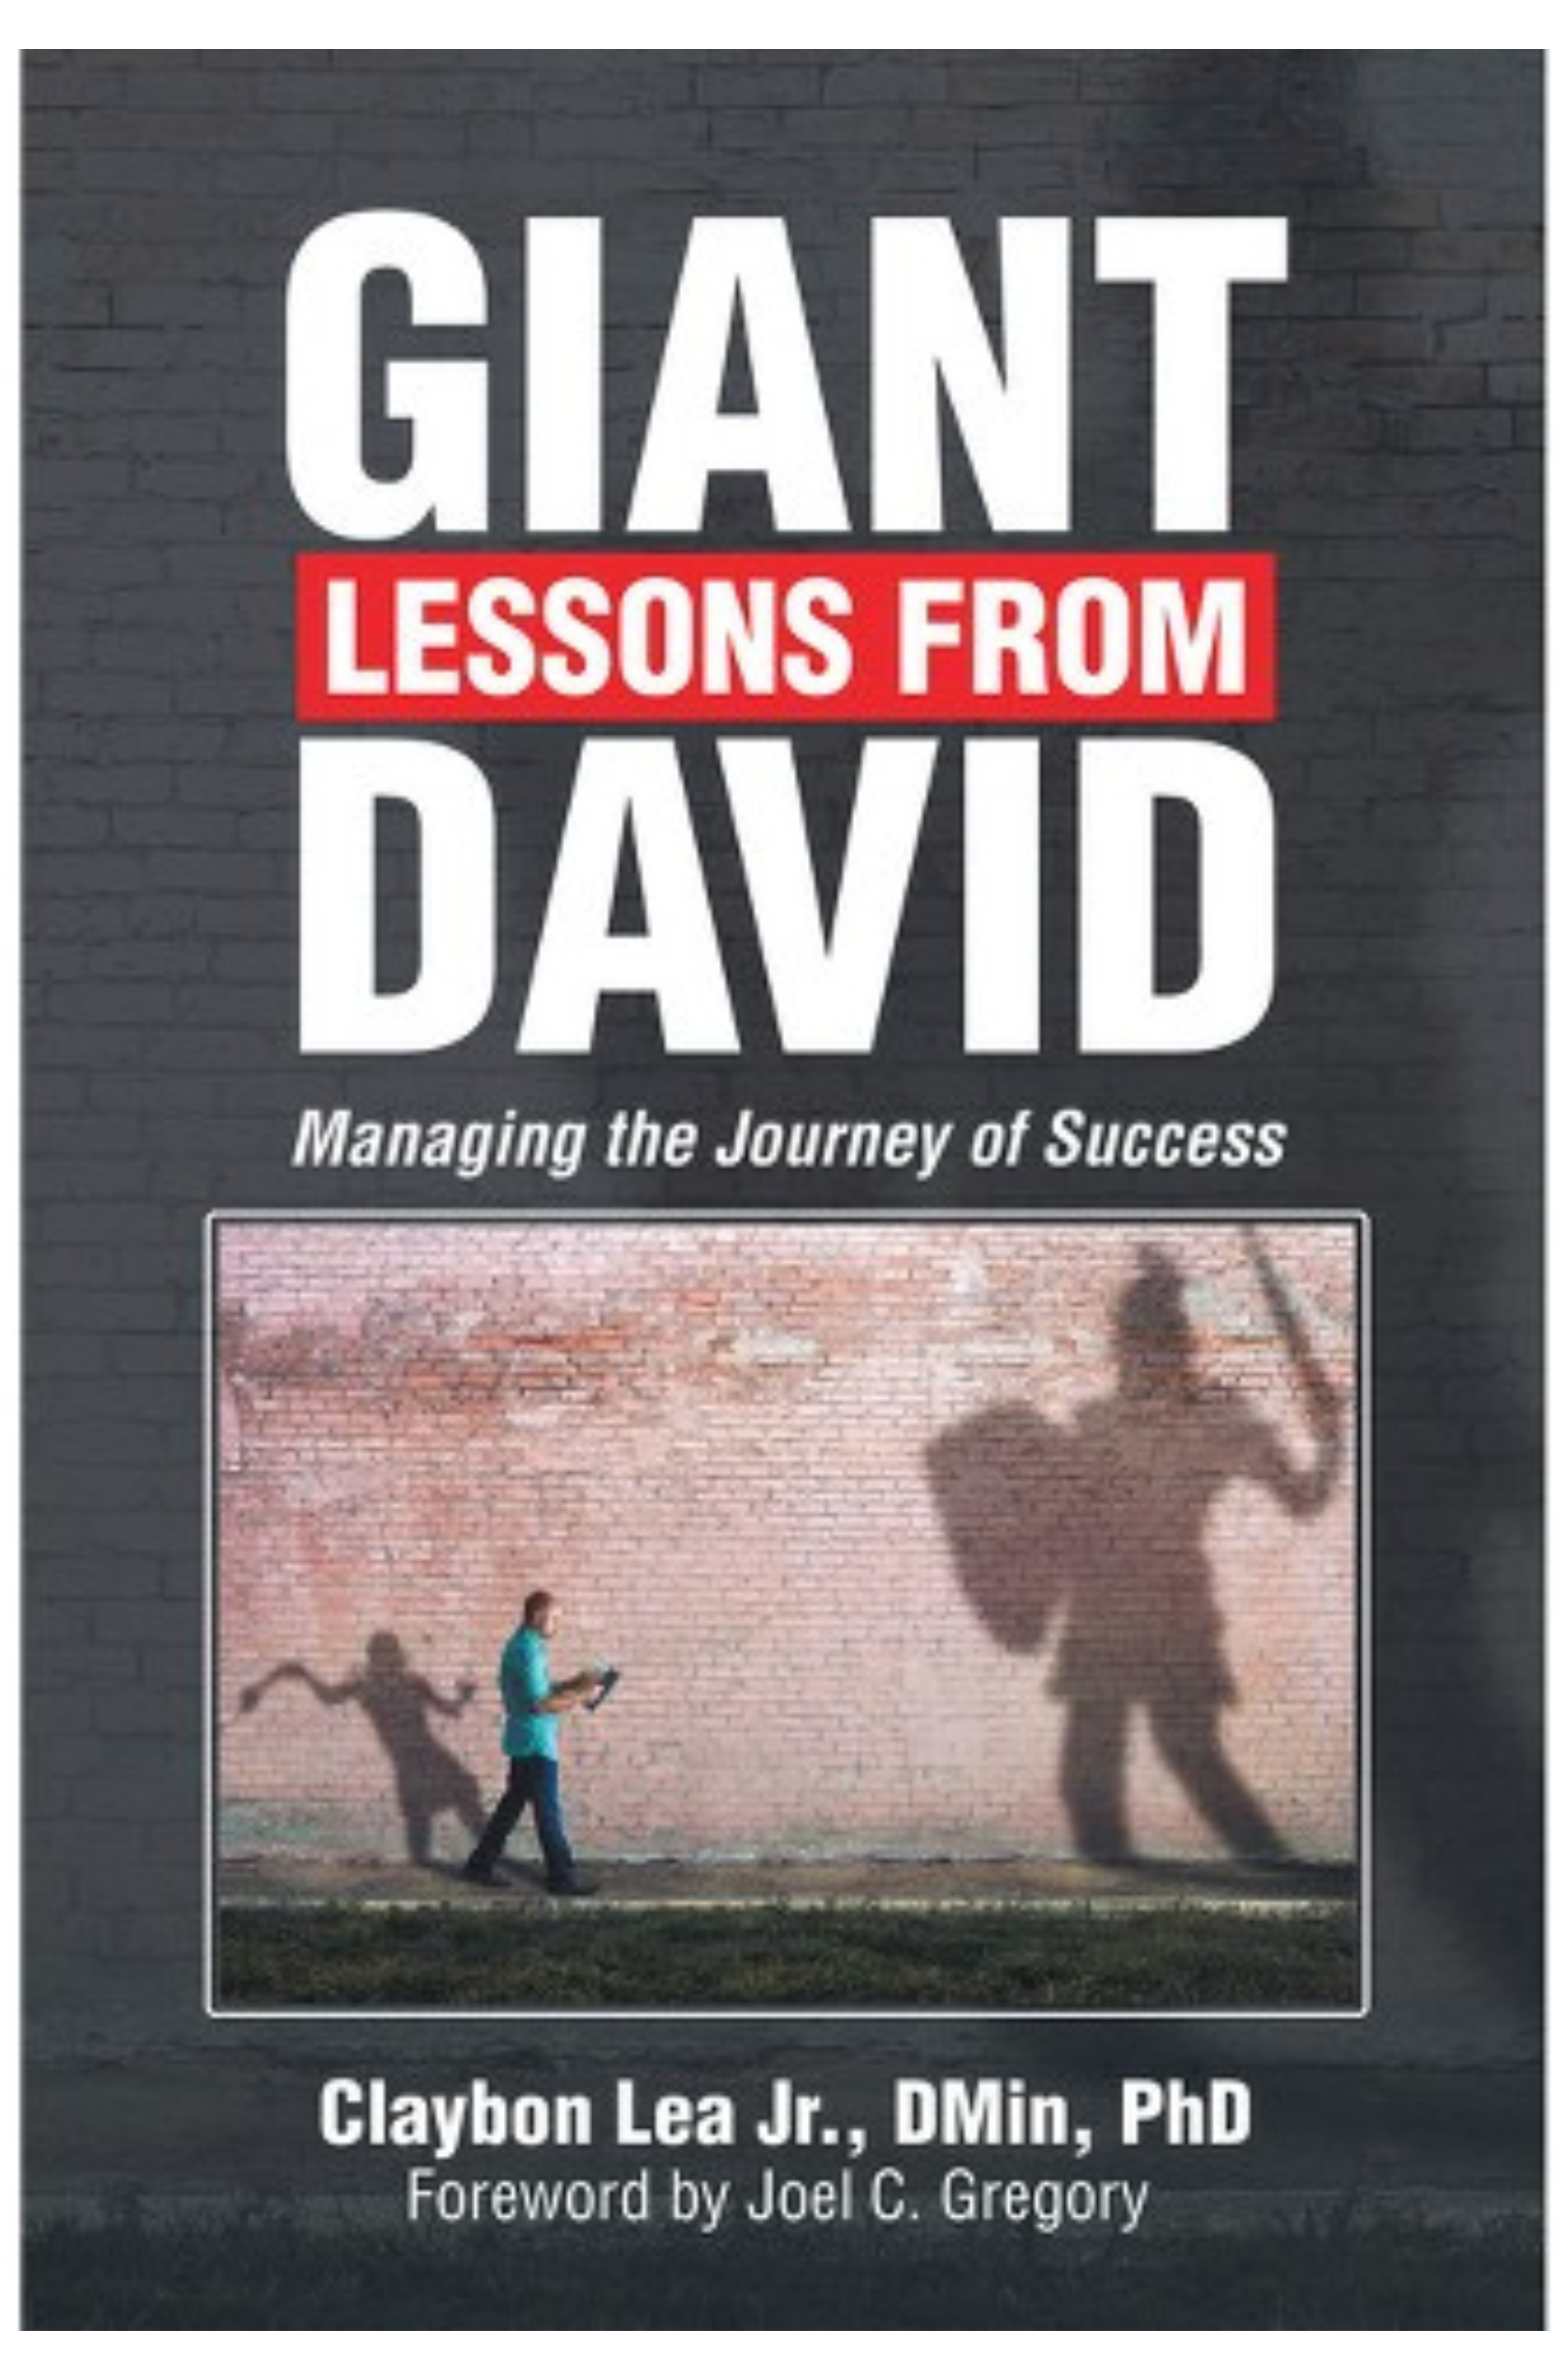 Giant Lessons From David: Managing the Journey of Success